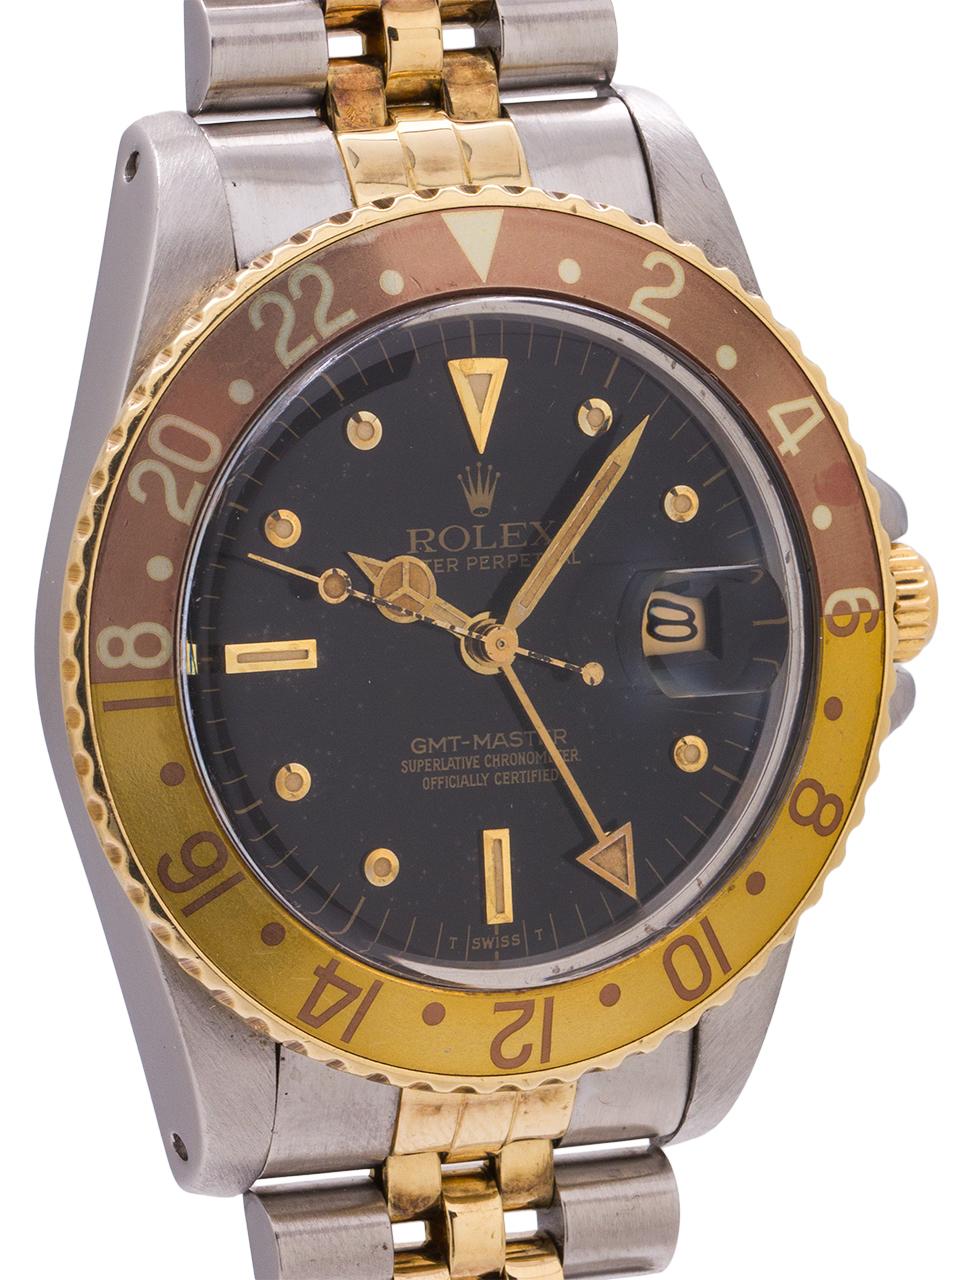 
Great looking vintage 1982 Rolex SS/14K YG GMT ref 16753 with an original gloss black nipple index dial with richly patina’d gilt luminous hands and faded bronze and gold insert. Featuring a 40mm diameter case which has been previously polished,